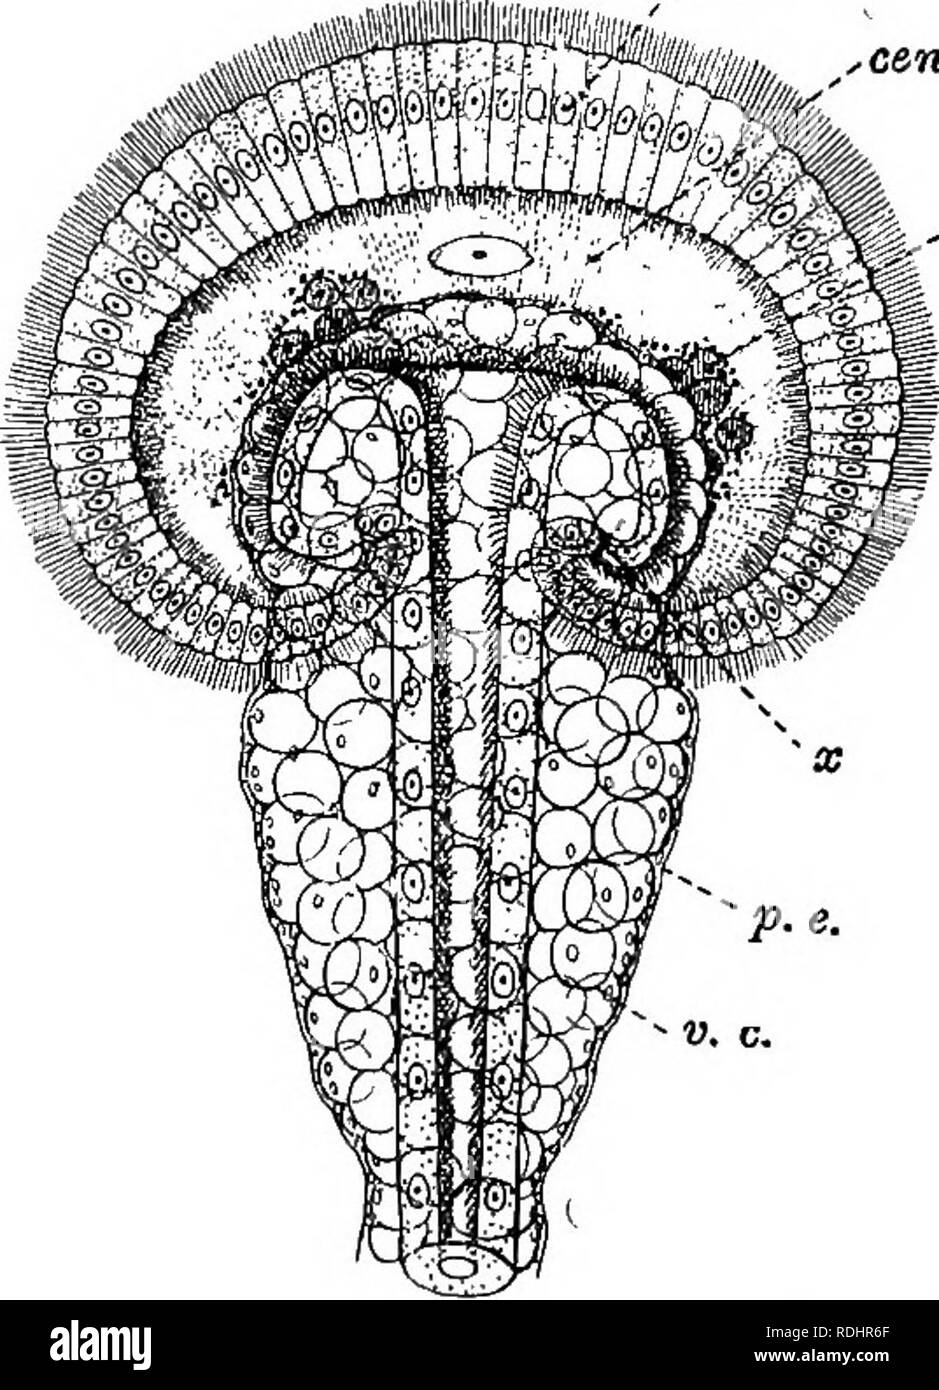 . A manual of elementary zoology . Zoology. 224 MANUAL OF ELEMENTARY ZOOLOGY nephrostome consists of a large crescentic central cell with a rim of marginal cells around it arranged so as to surround a crescentic, funnel-shaped opening, turned to one side. The funnel is ciliated, and from it there leads backwards a narrow ciliated tube. This passes through the septum to the main part of the nephridium, which lies behind the. deb. p.e B Fig. 141.—The nephrostome or funnel of a nephridium of the earth- worm. A, in surface view, highly magnified; B, in longitudinal section, diagrammatic. cen.c, Ce Stock Photo